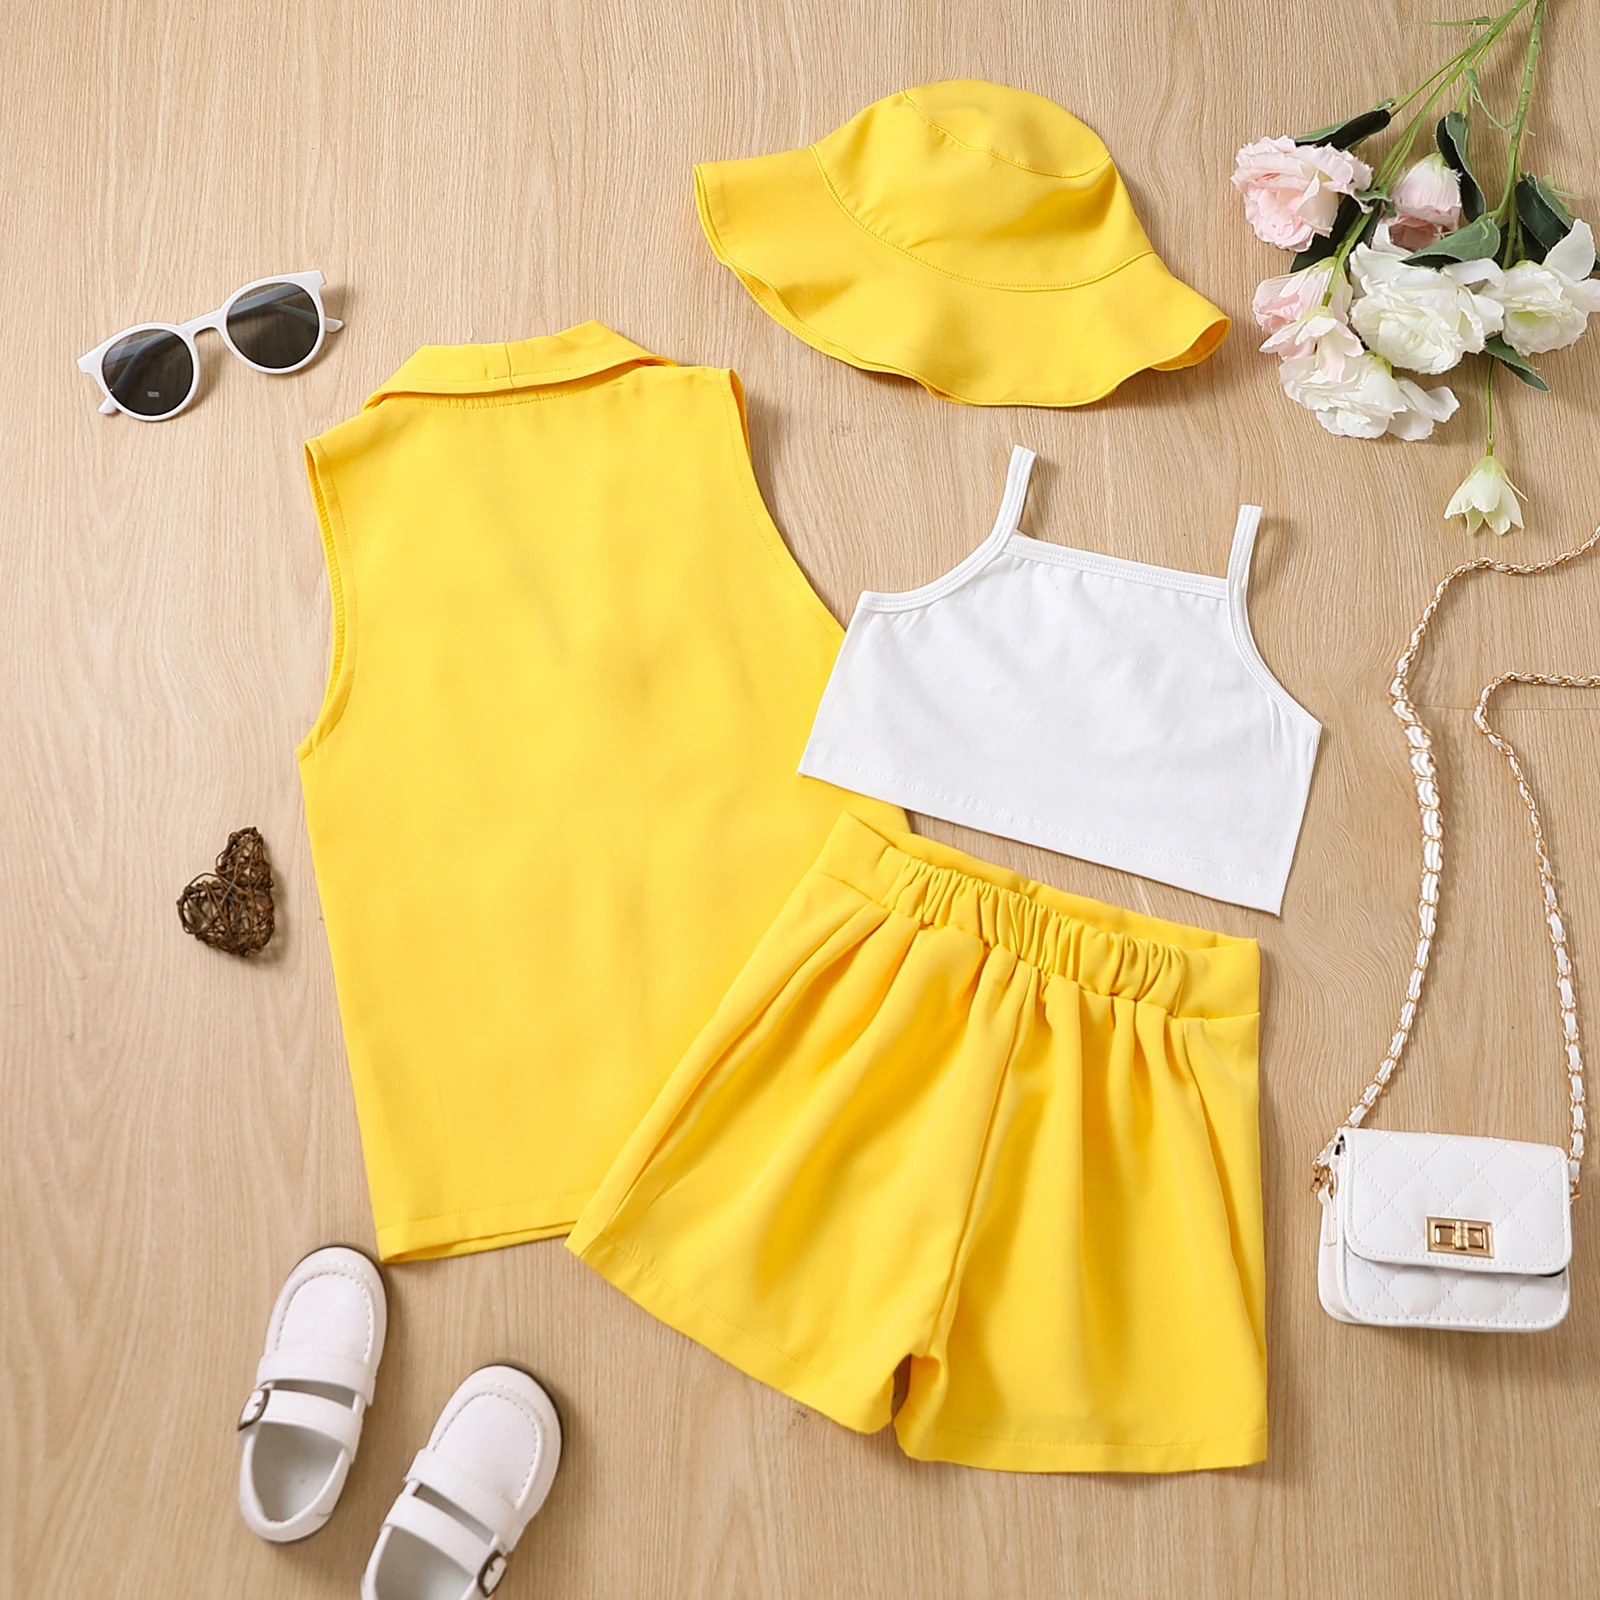 SUNSIOM 4Pcs Girls Summer Outfits Solid Color Sleeveless Camisoles Sling  Tank Tops Buttons Shorts Lapel Vest Hat Fashion Sets - AliExpress